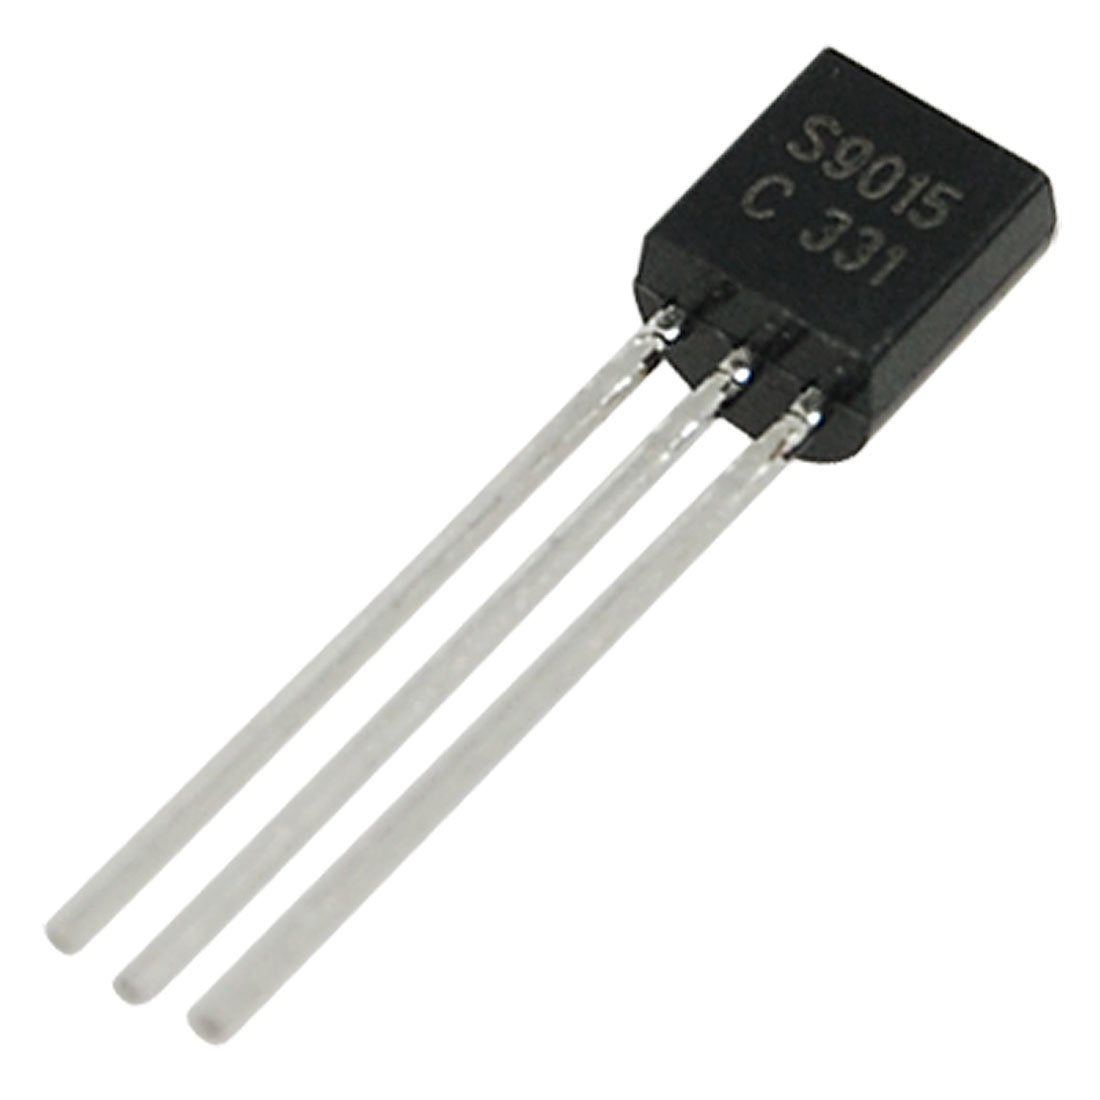 Transistor 9015 / S9015 | 2 Pack | 45V / 0.1A | PNP | TO-92 | CE-TRA-09